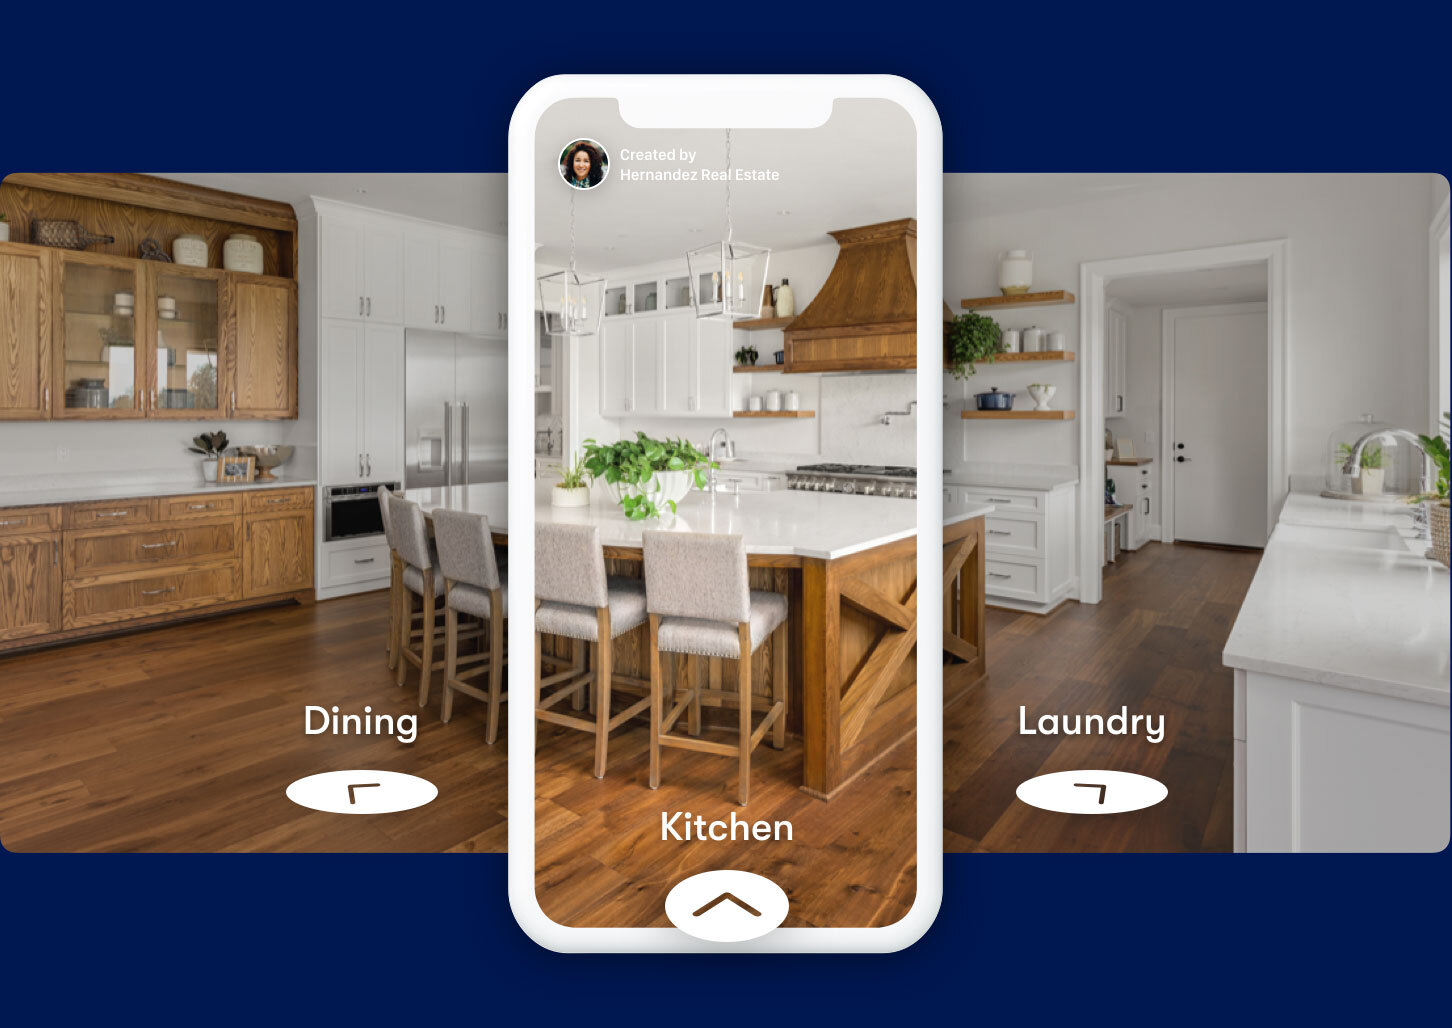 How To Download Pictures From Zillow